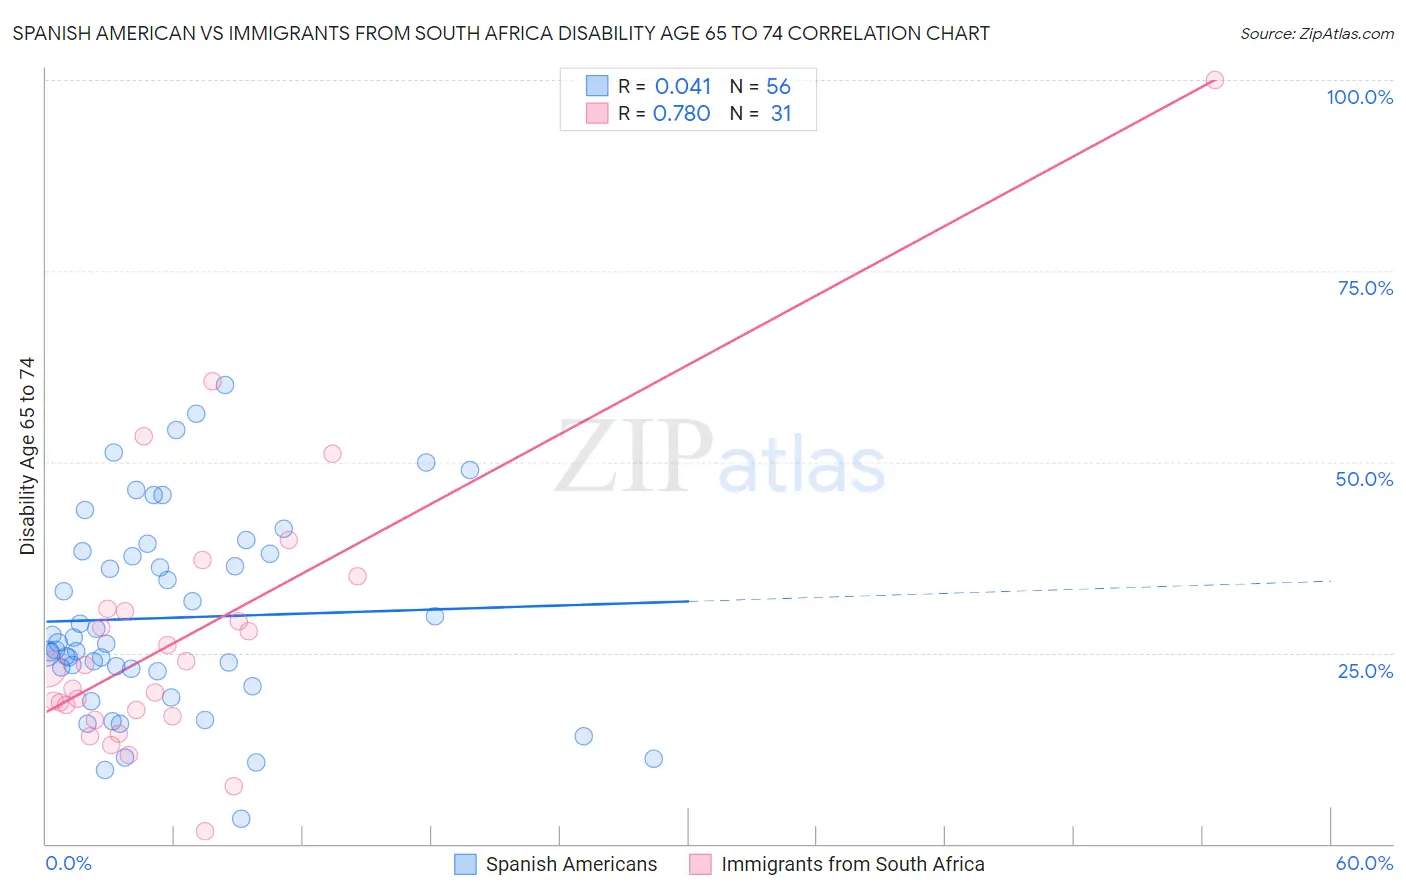 Spanish American vs Immigrants from South Africa Disability Age 65 to 74